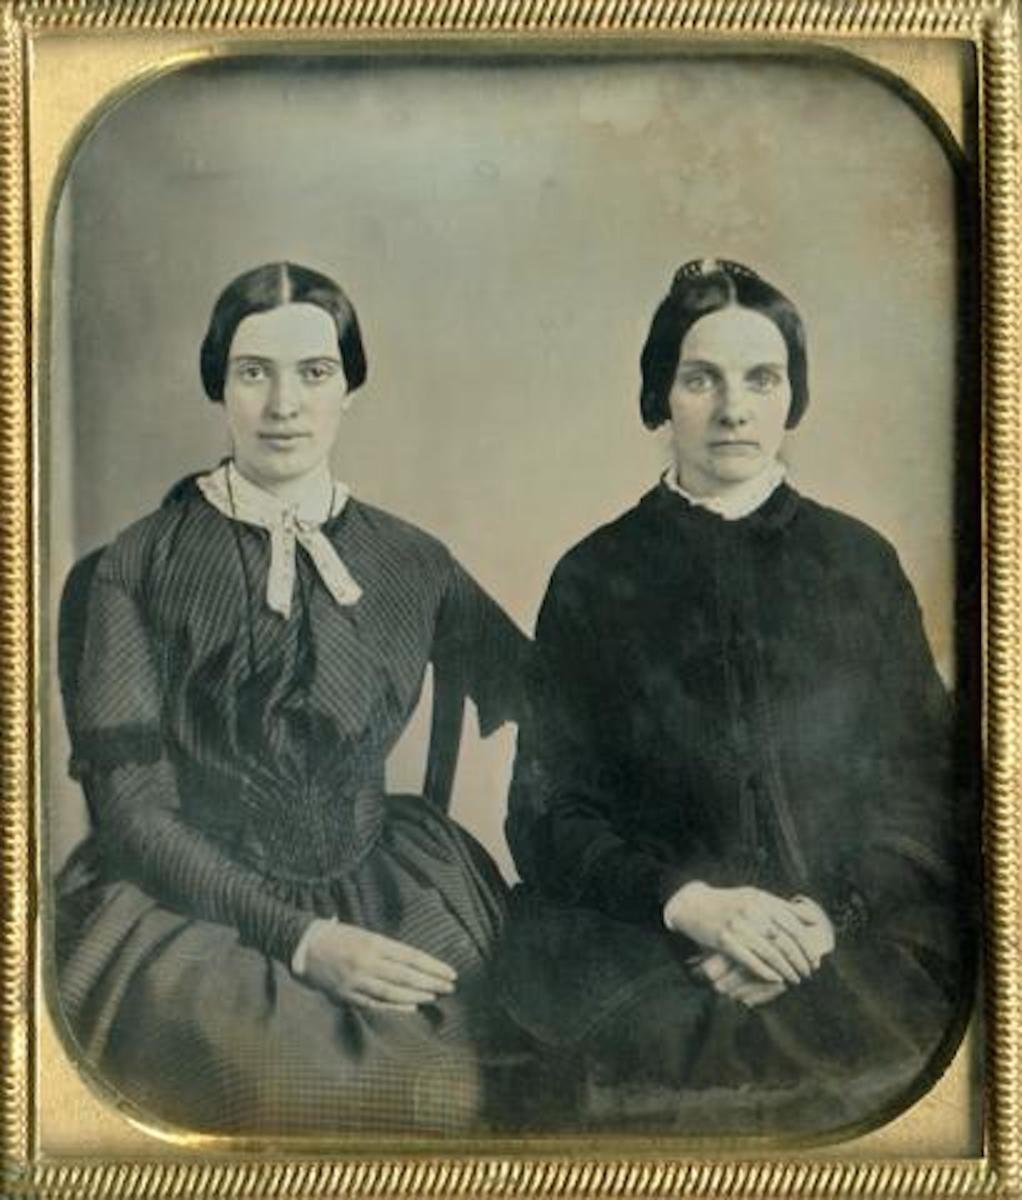 Emily Dickinson - circa 1859 - age 29 with Kate Scott Turner.  This daguerrotype is purported to be an image of the poet, but it has not been authenticated.